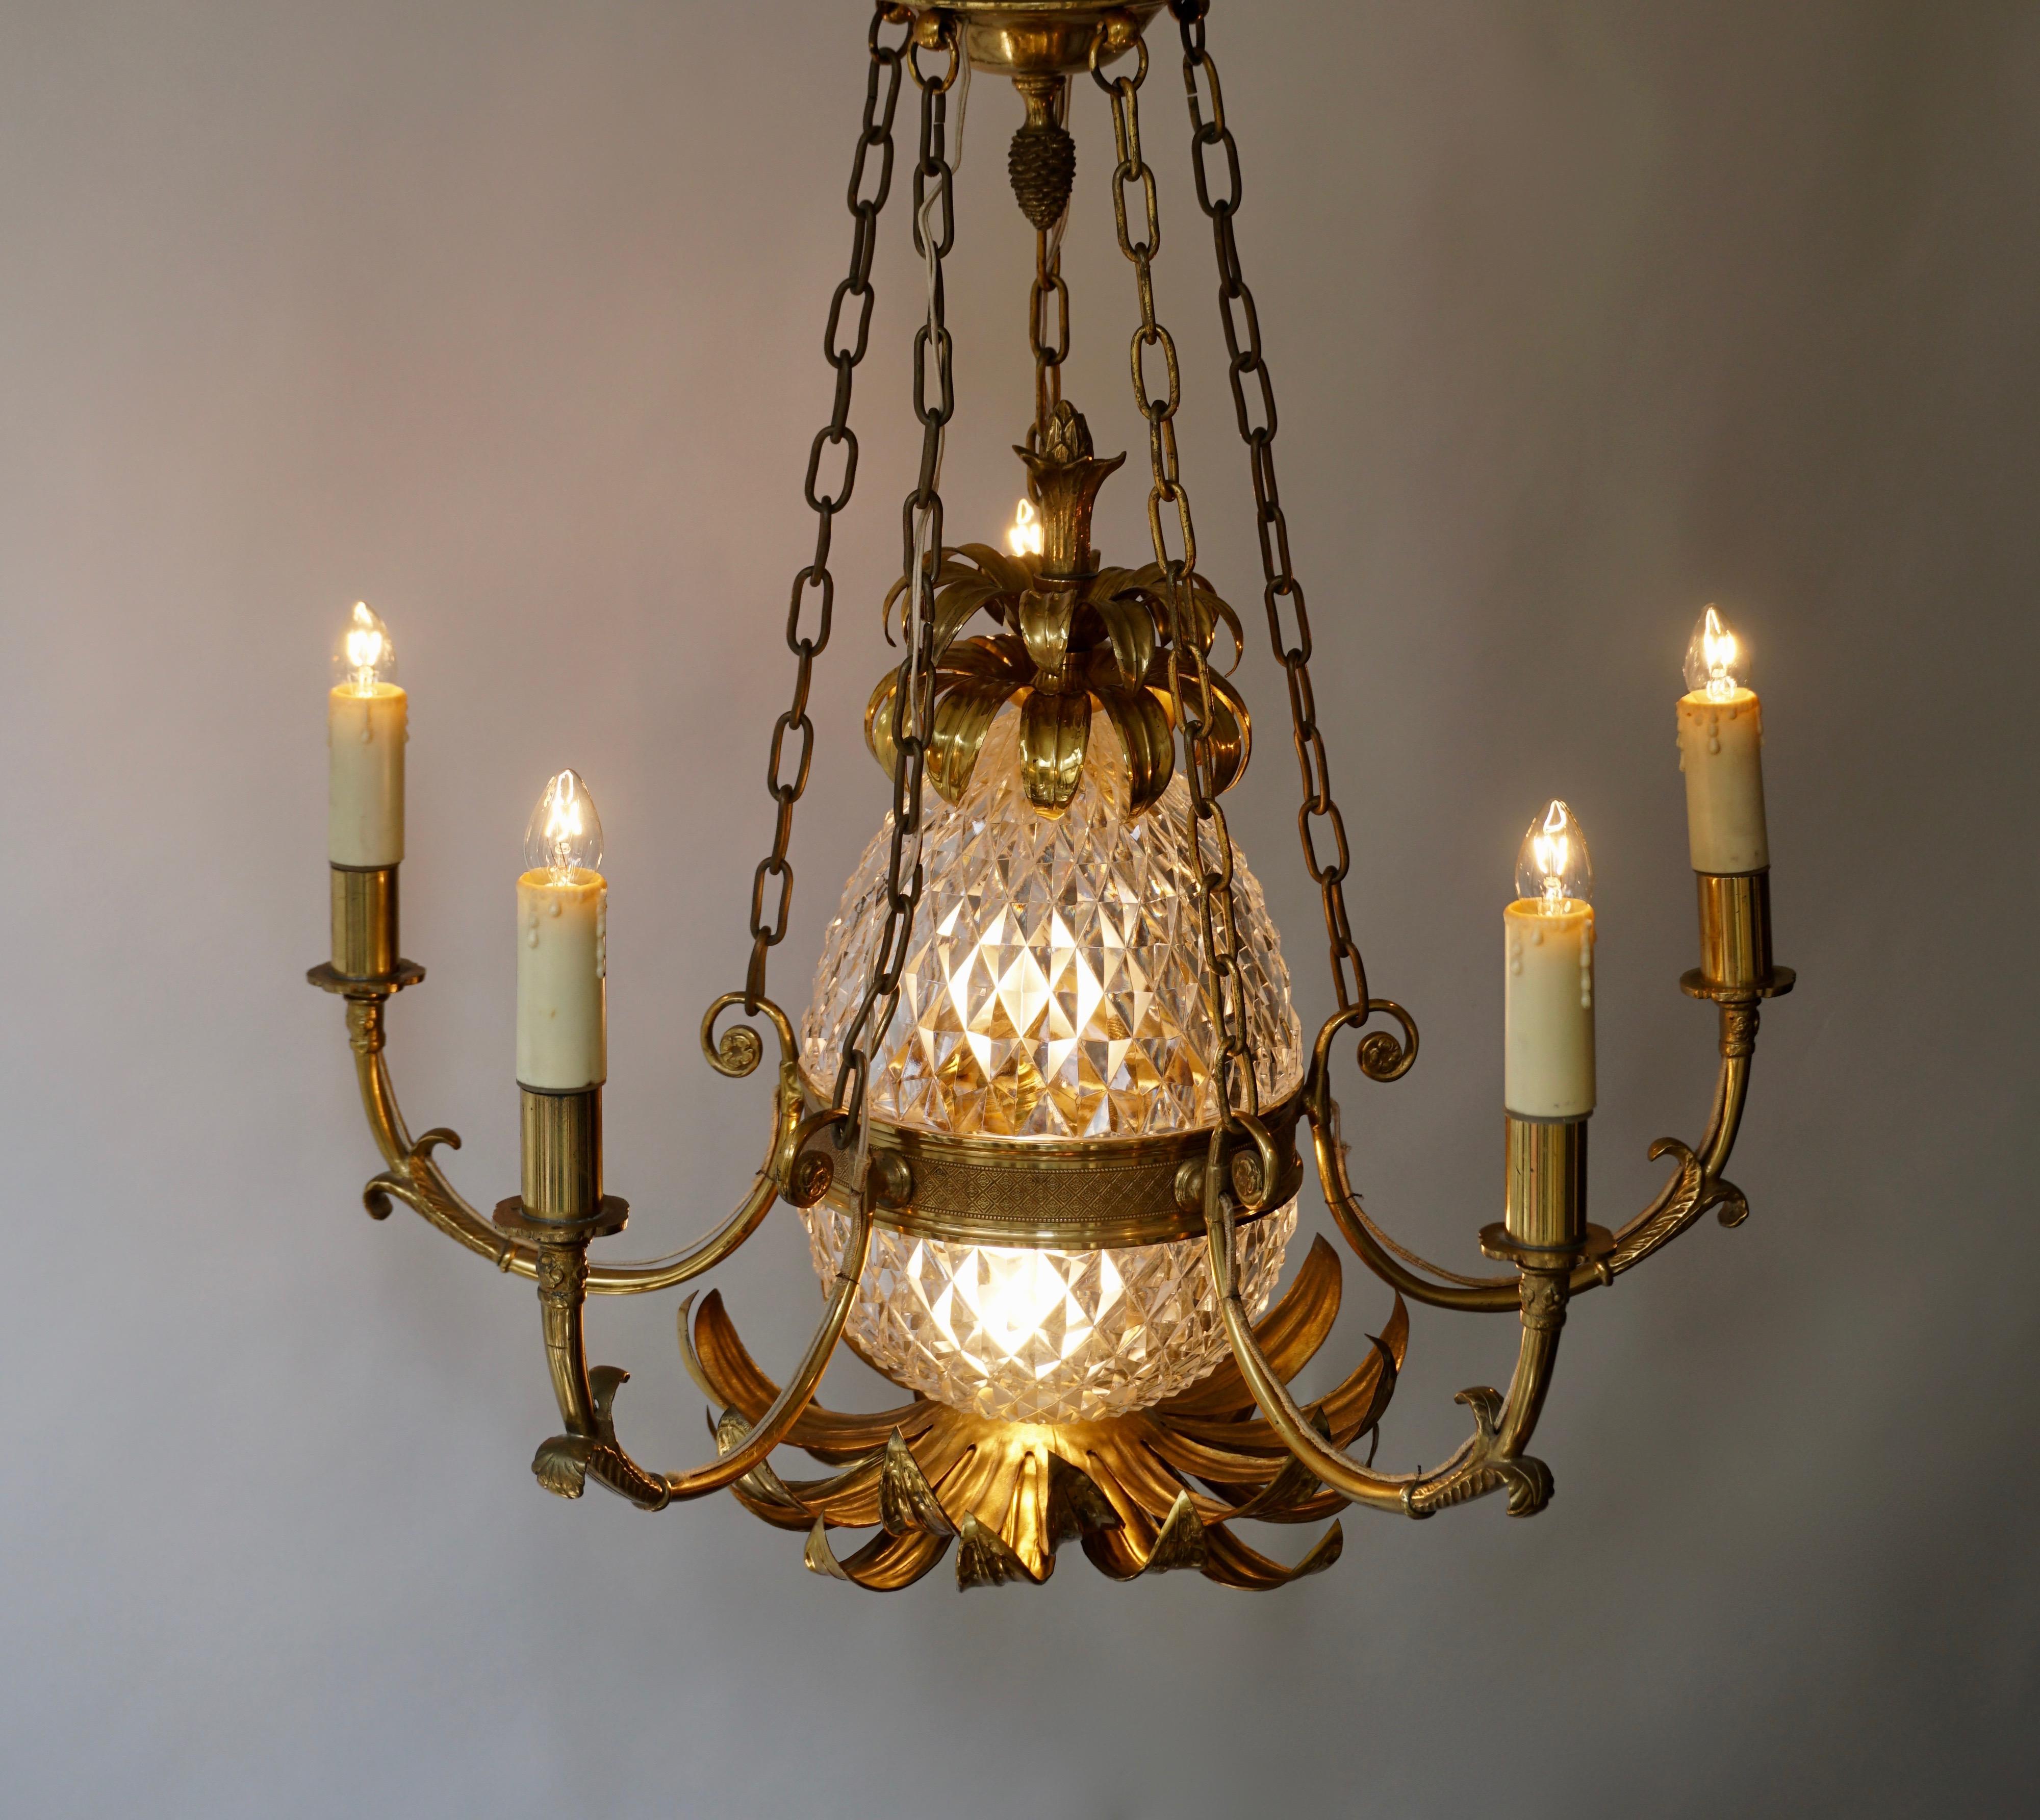 Brass and Cut Crystal Pineapple Chandelier with 5-Arm Light For Sale 3